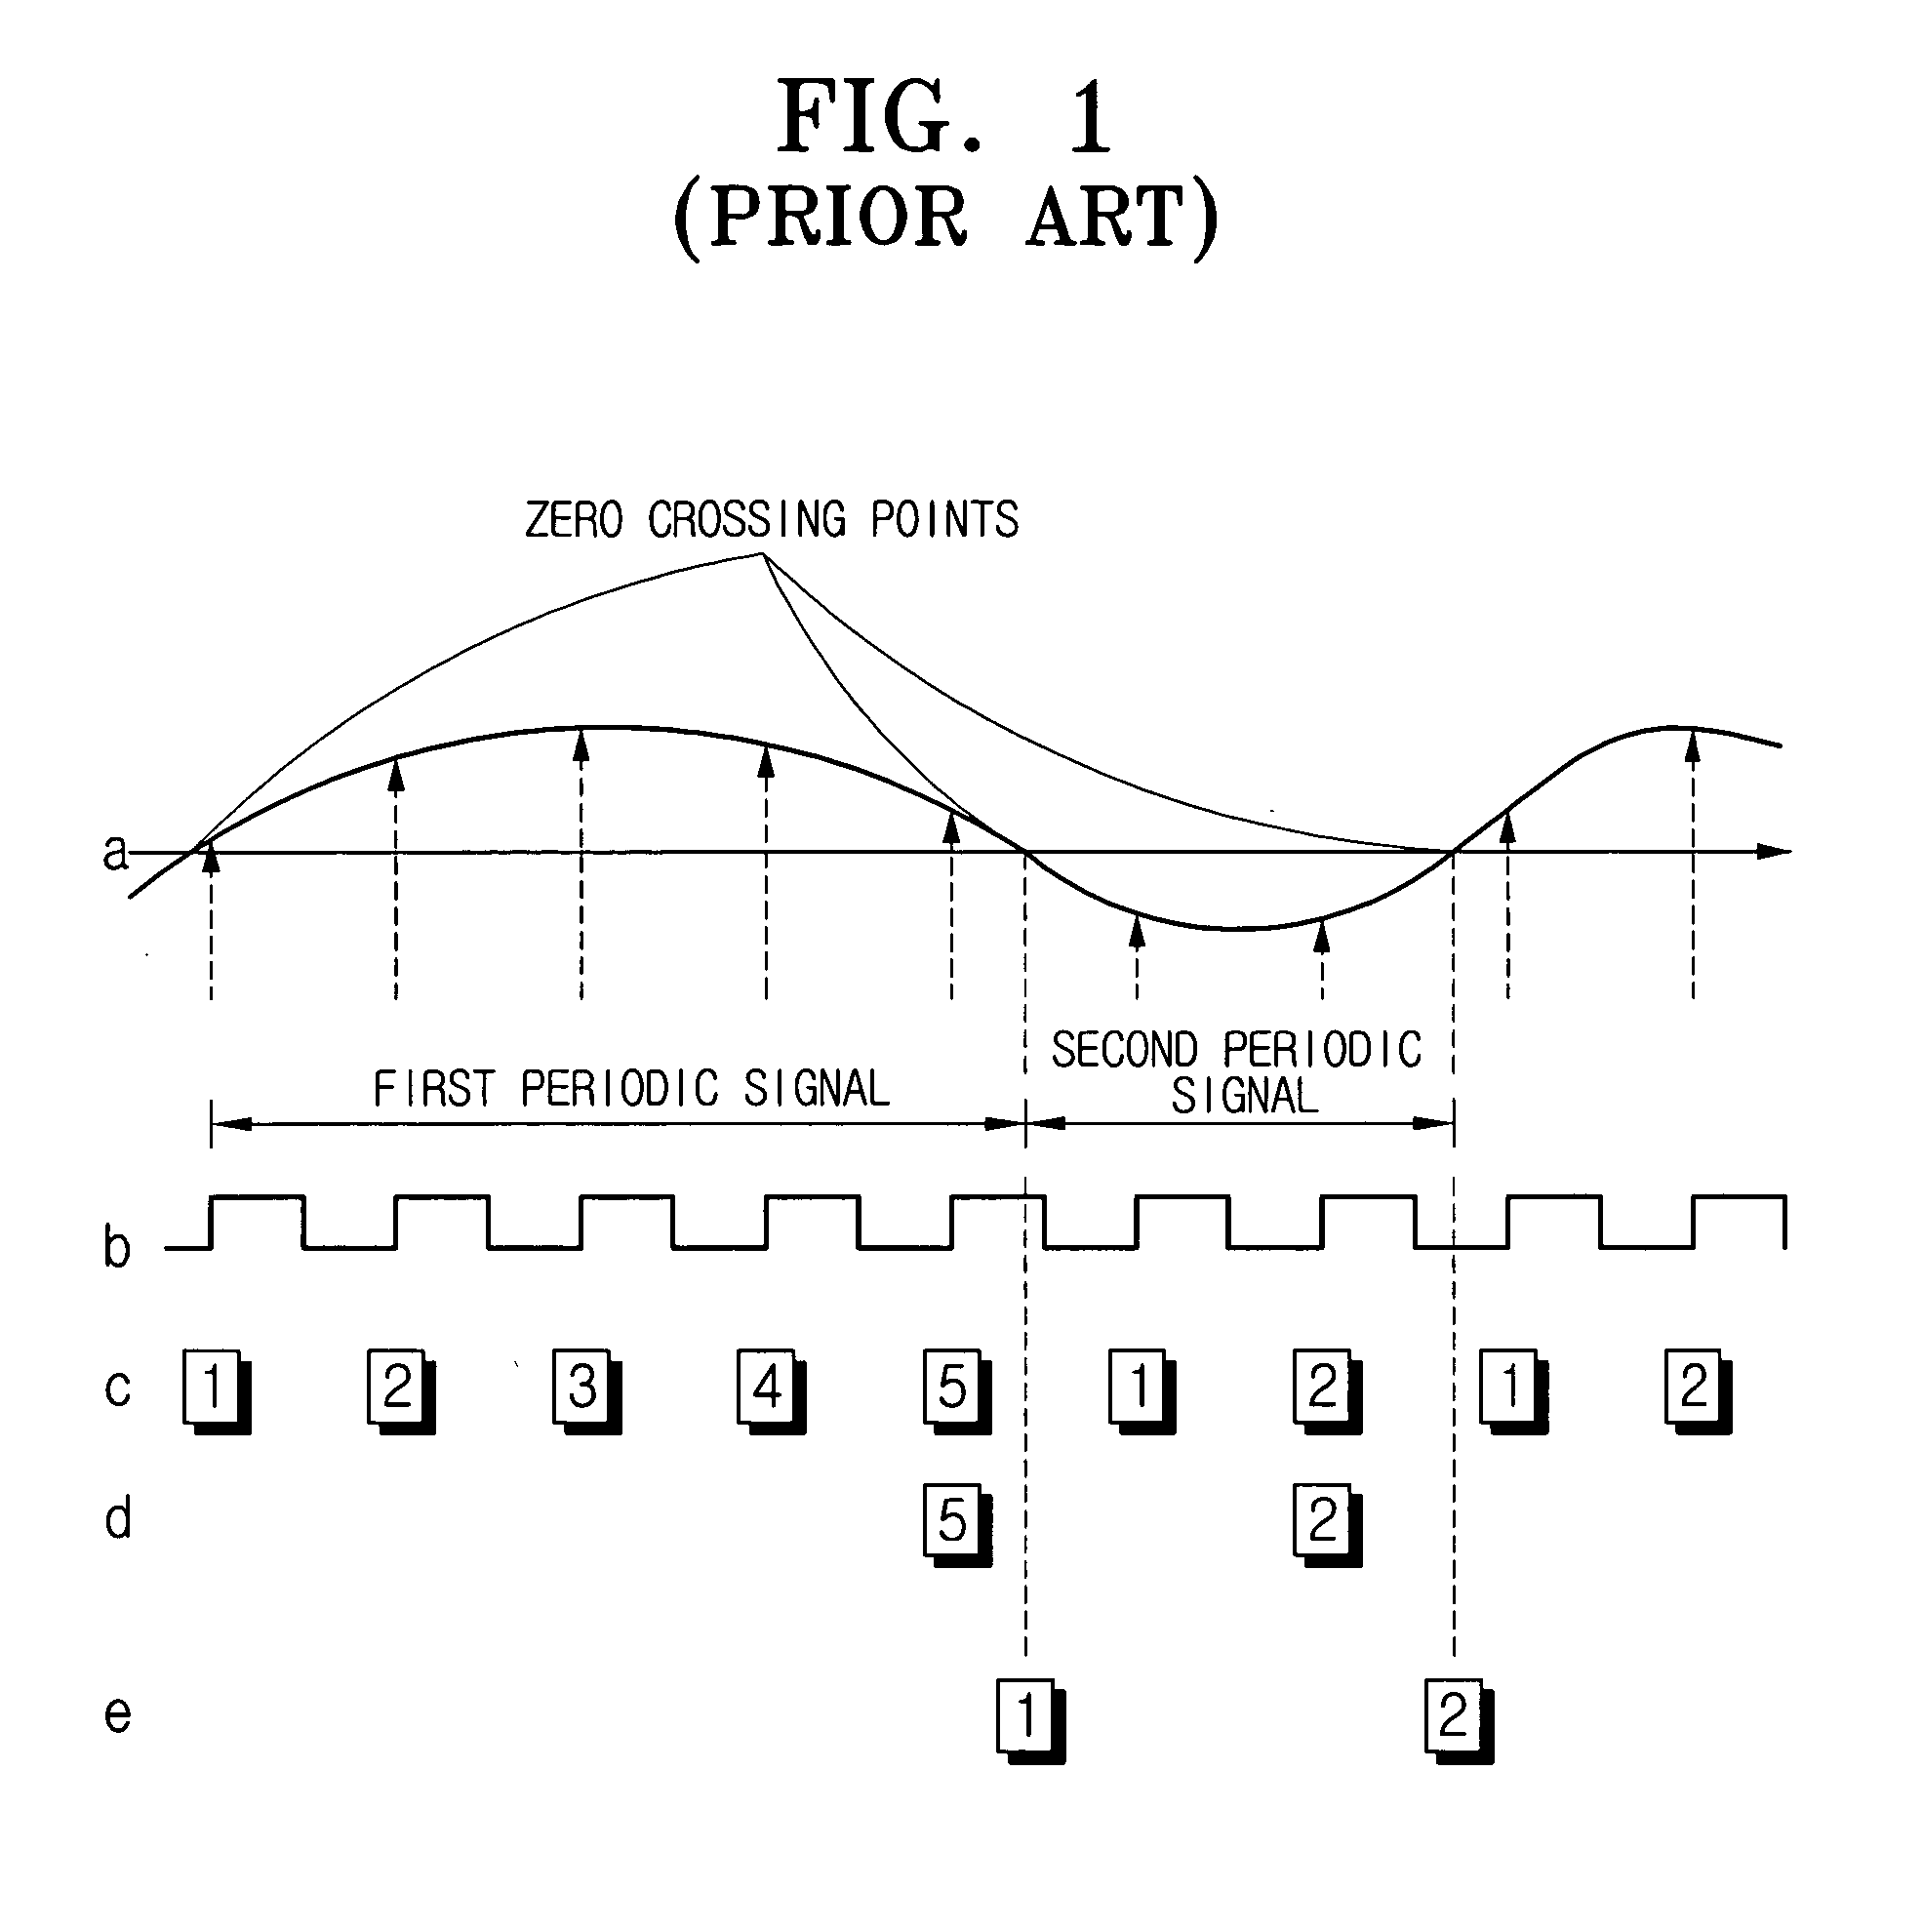 Frequency error detection apparatus and method based on histogram information on input signals